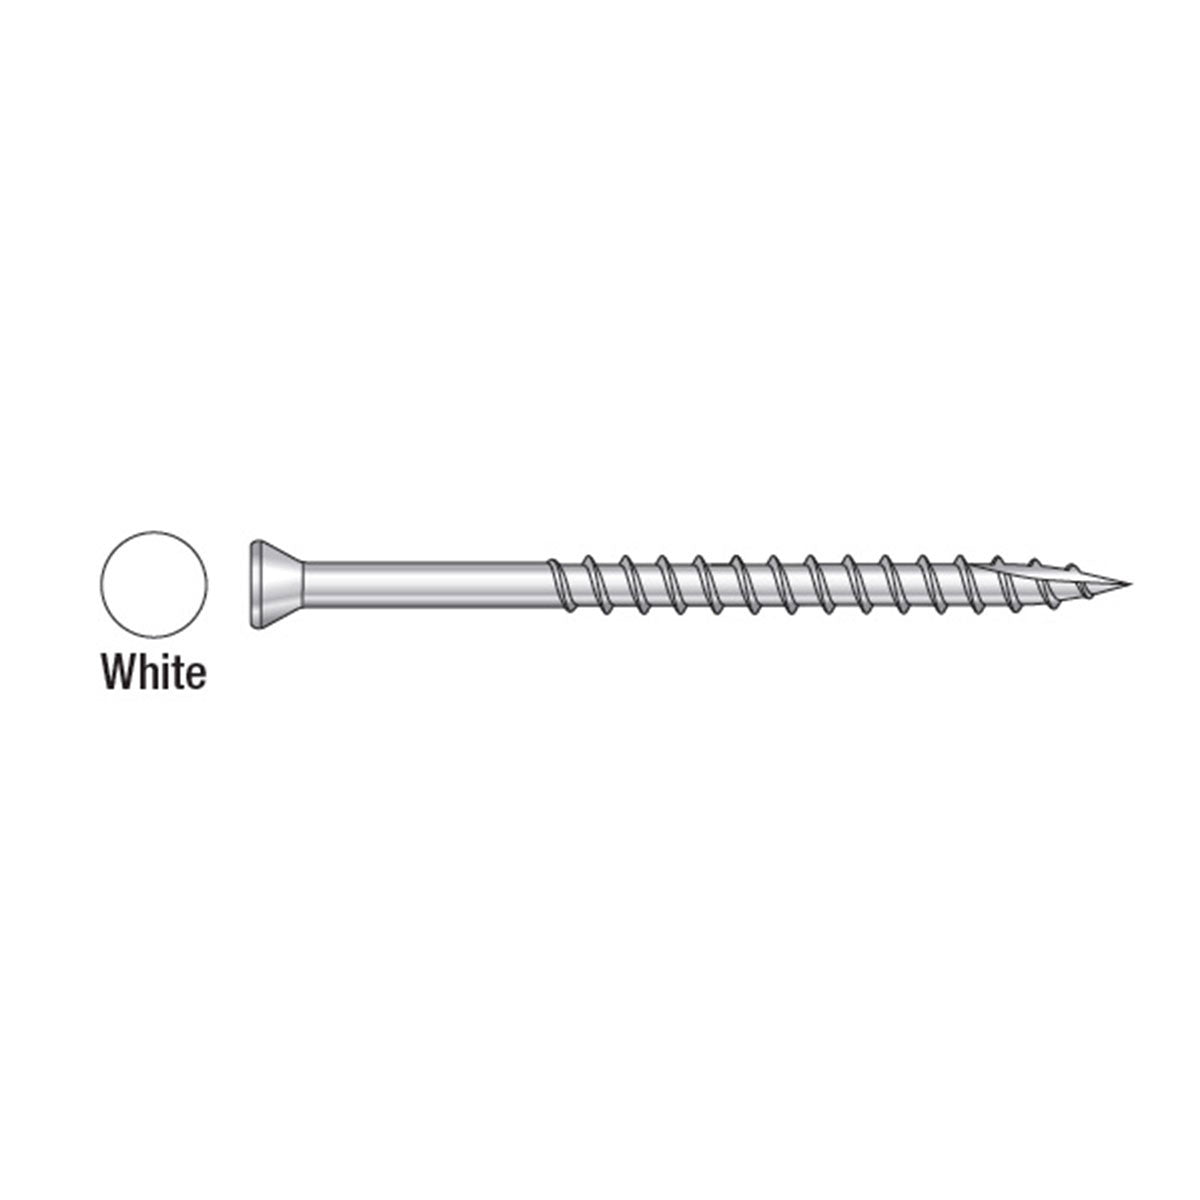 T07225FT1WH05 #7 2-1/4" Type 316 Stainless Steel 6 Lobe Drive Trim Head Screws Painted White - 5 Pound Box